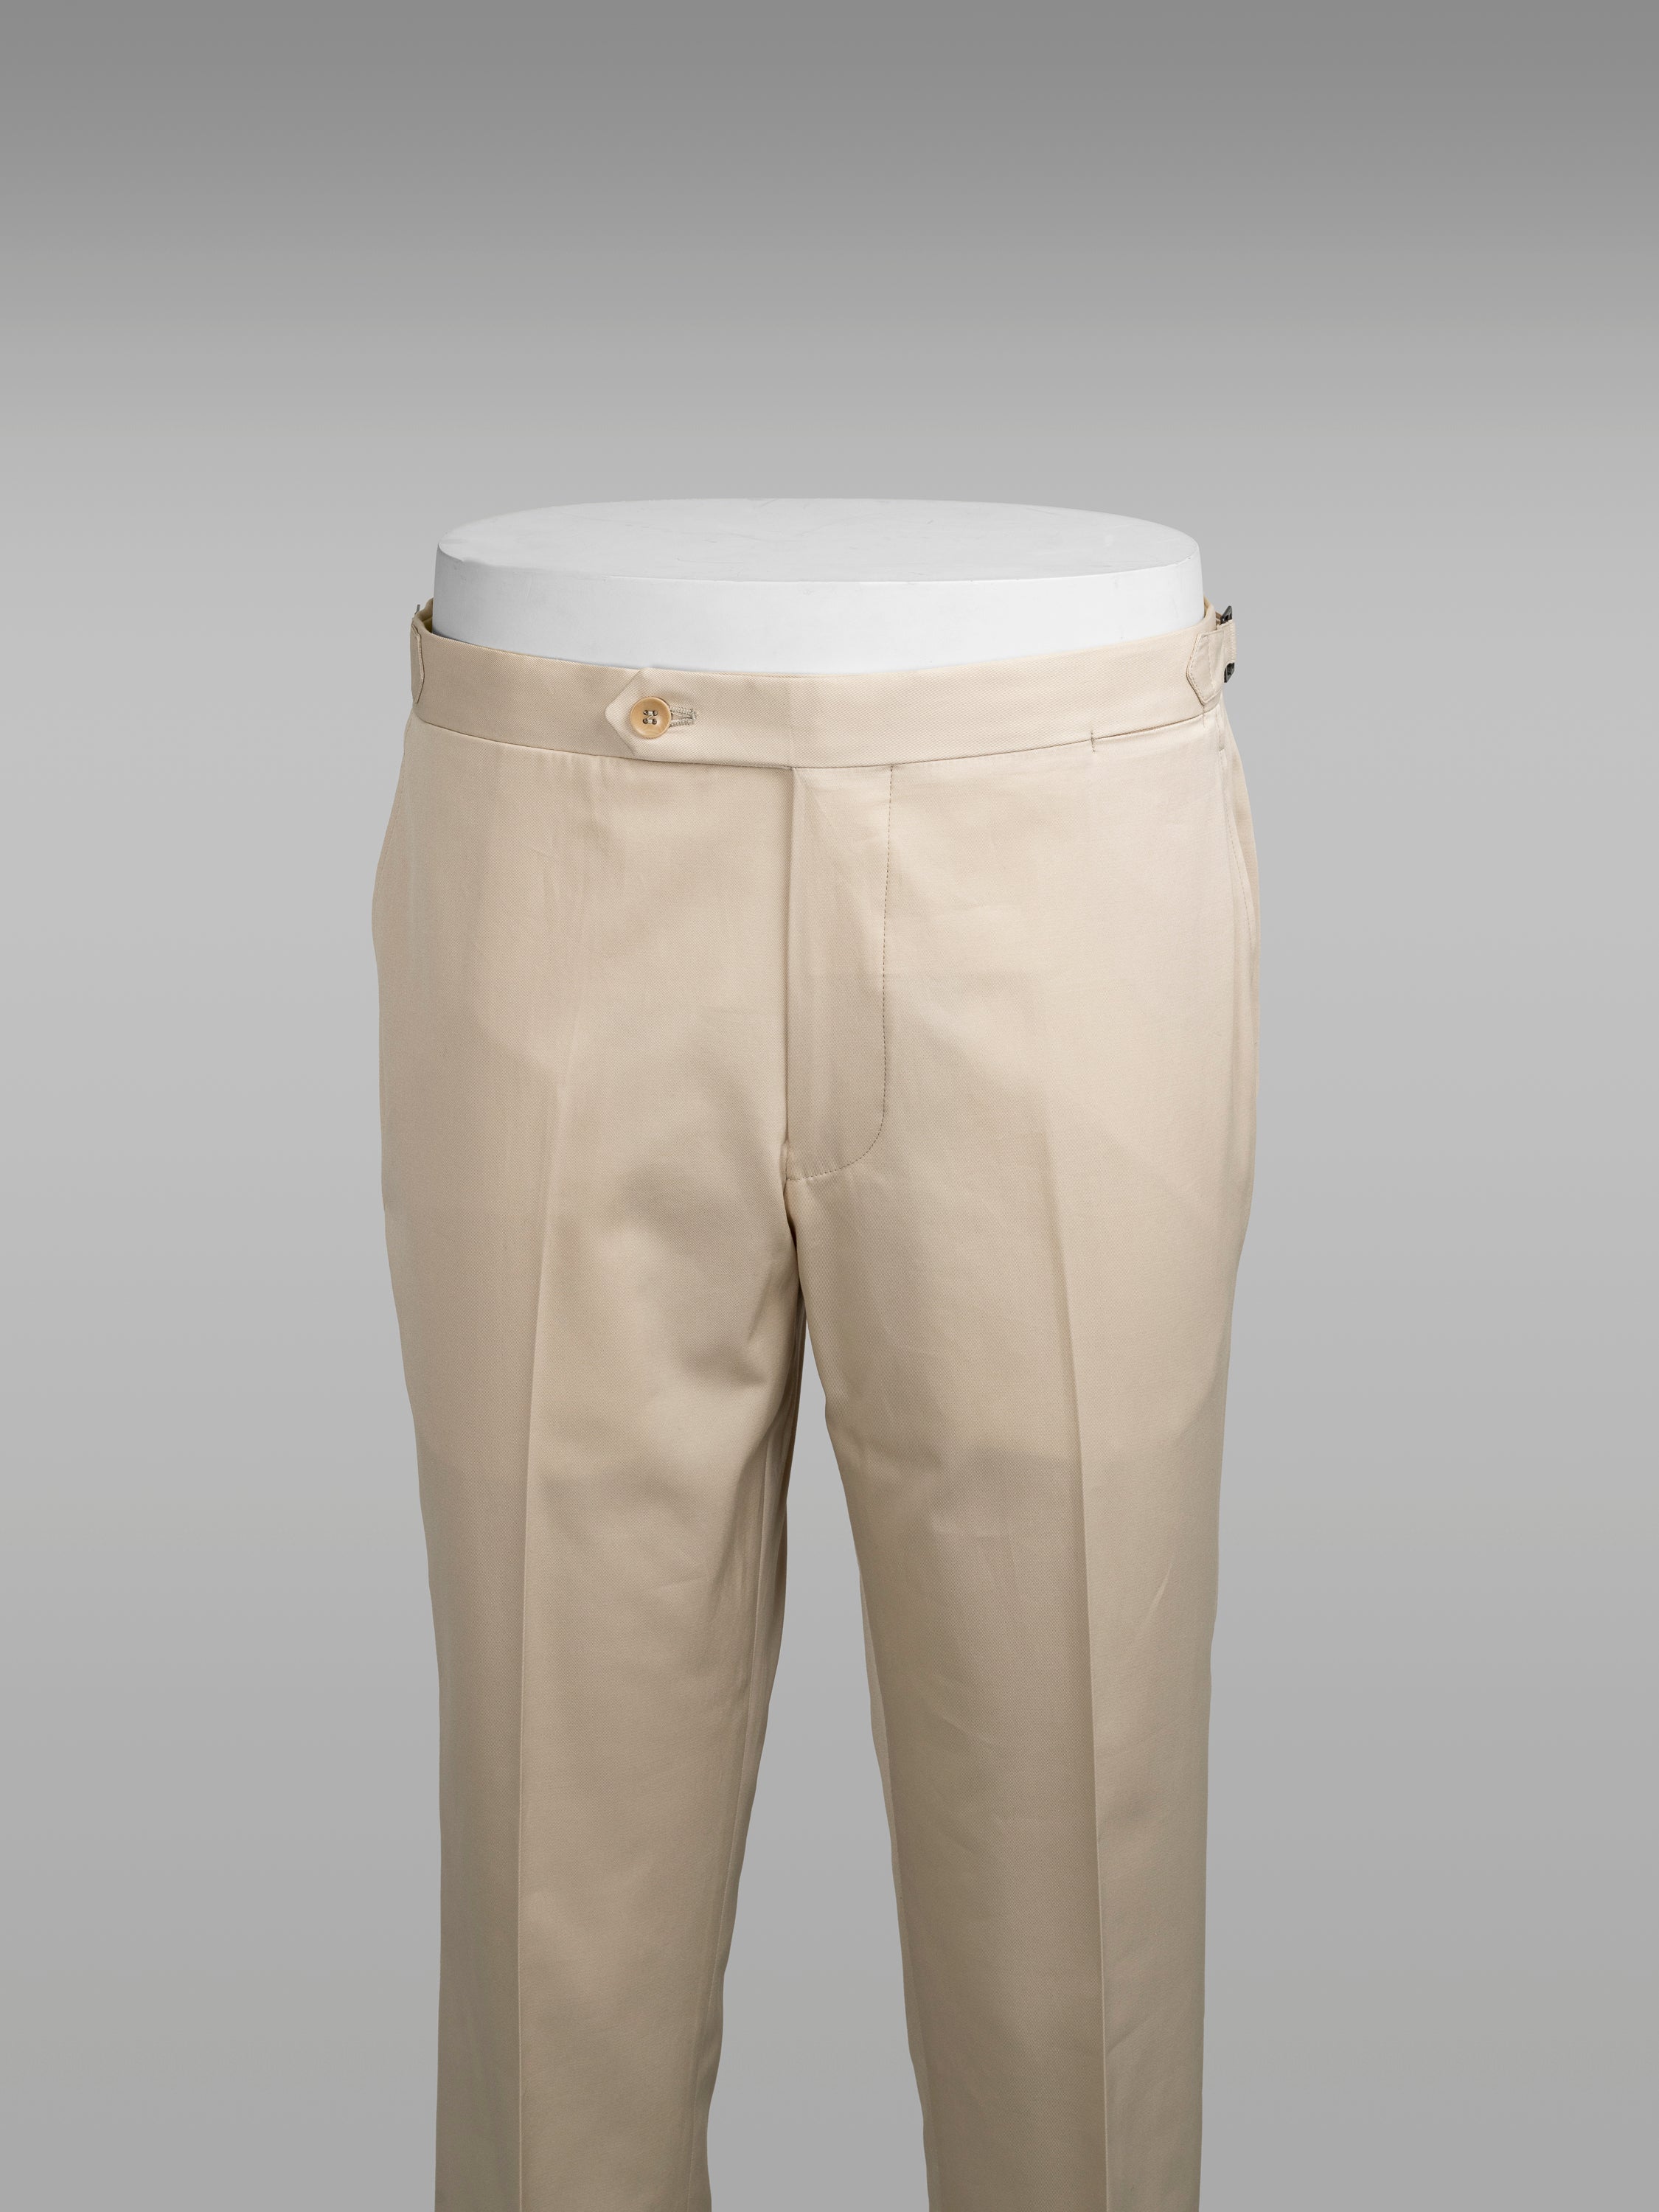 Buy Peter England Casuals Yellow Cotton Regular Fit Trousers for Mens  Online @ Tata CLiQ